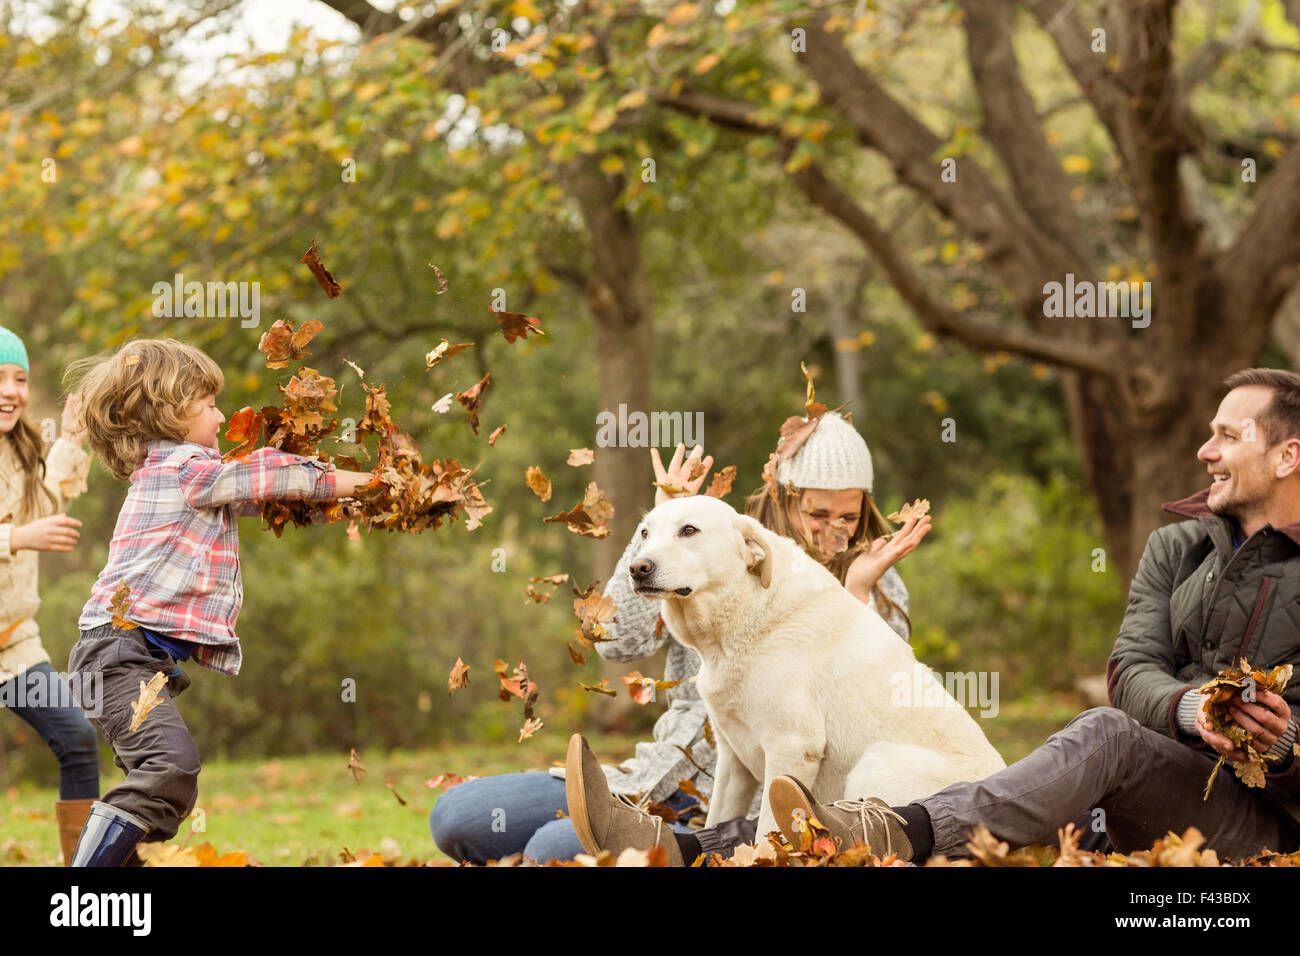 Young family with a dog in leaves Stock Photo